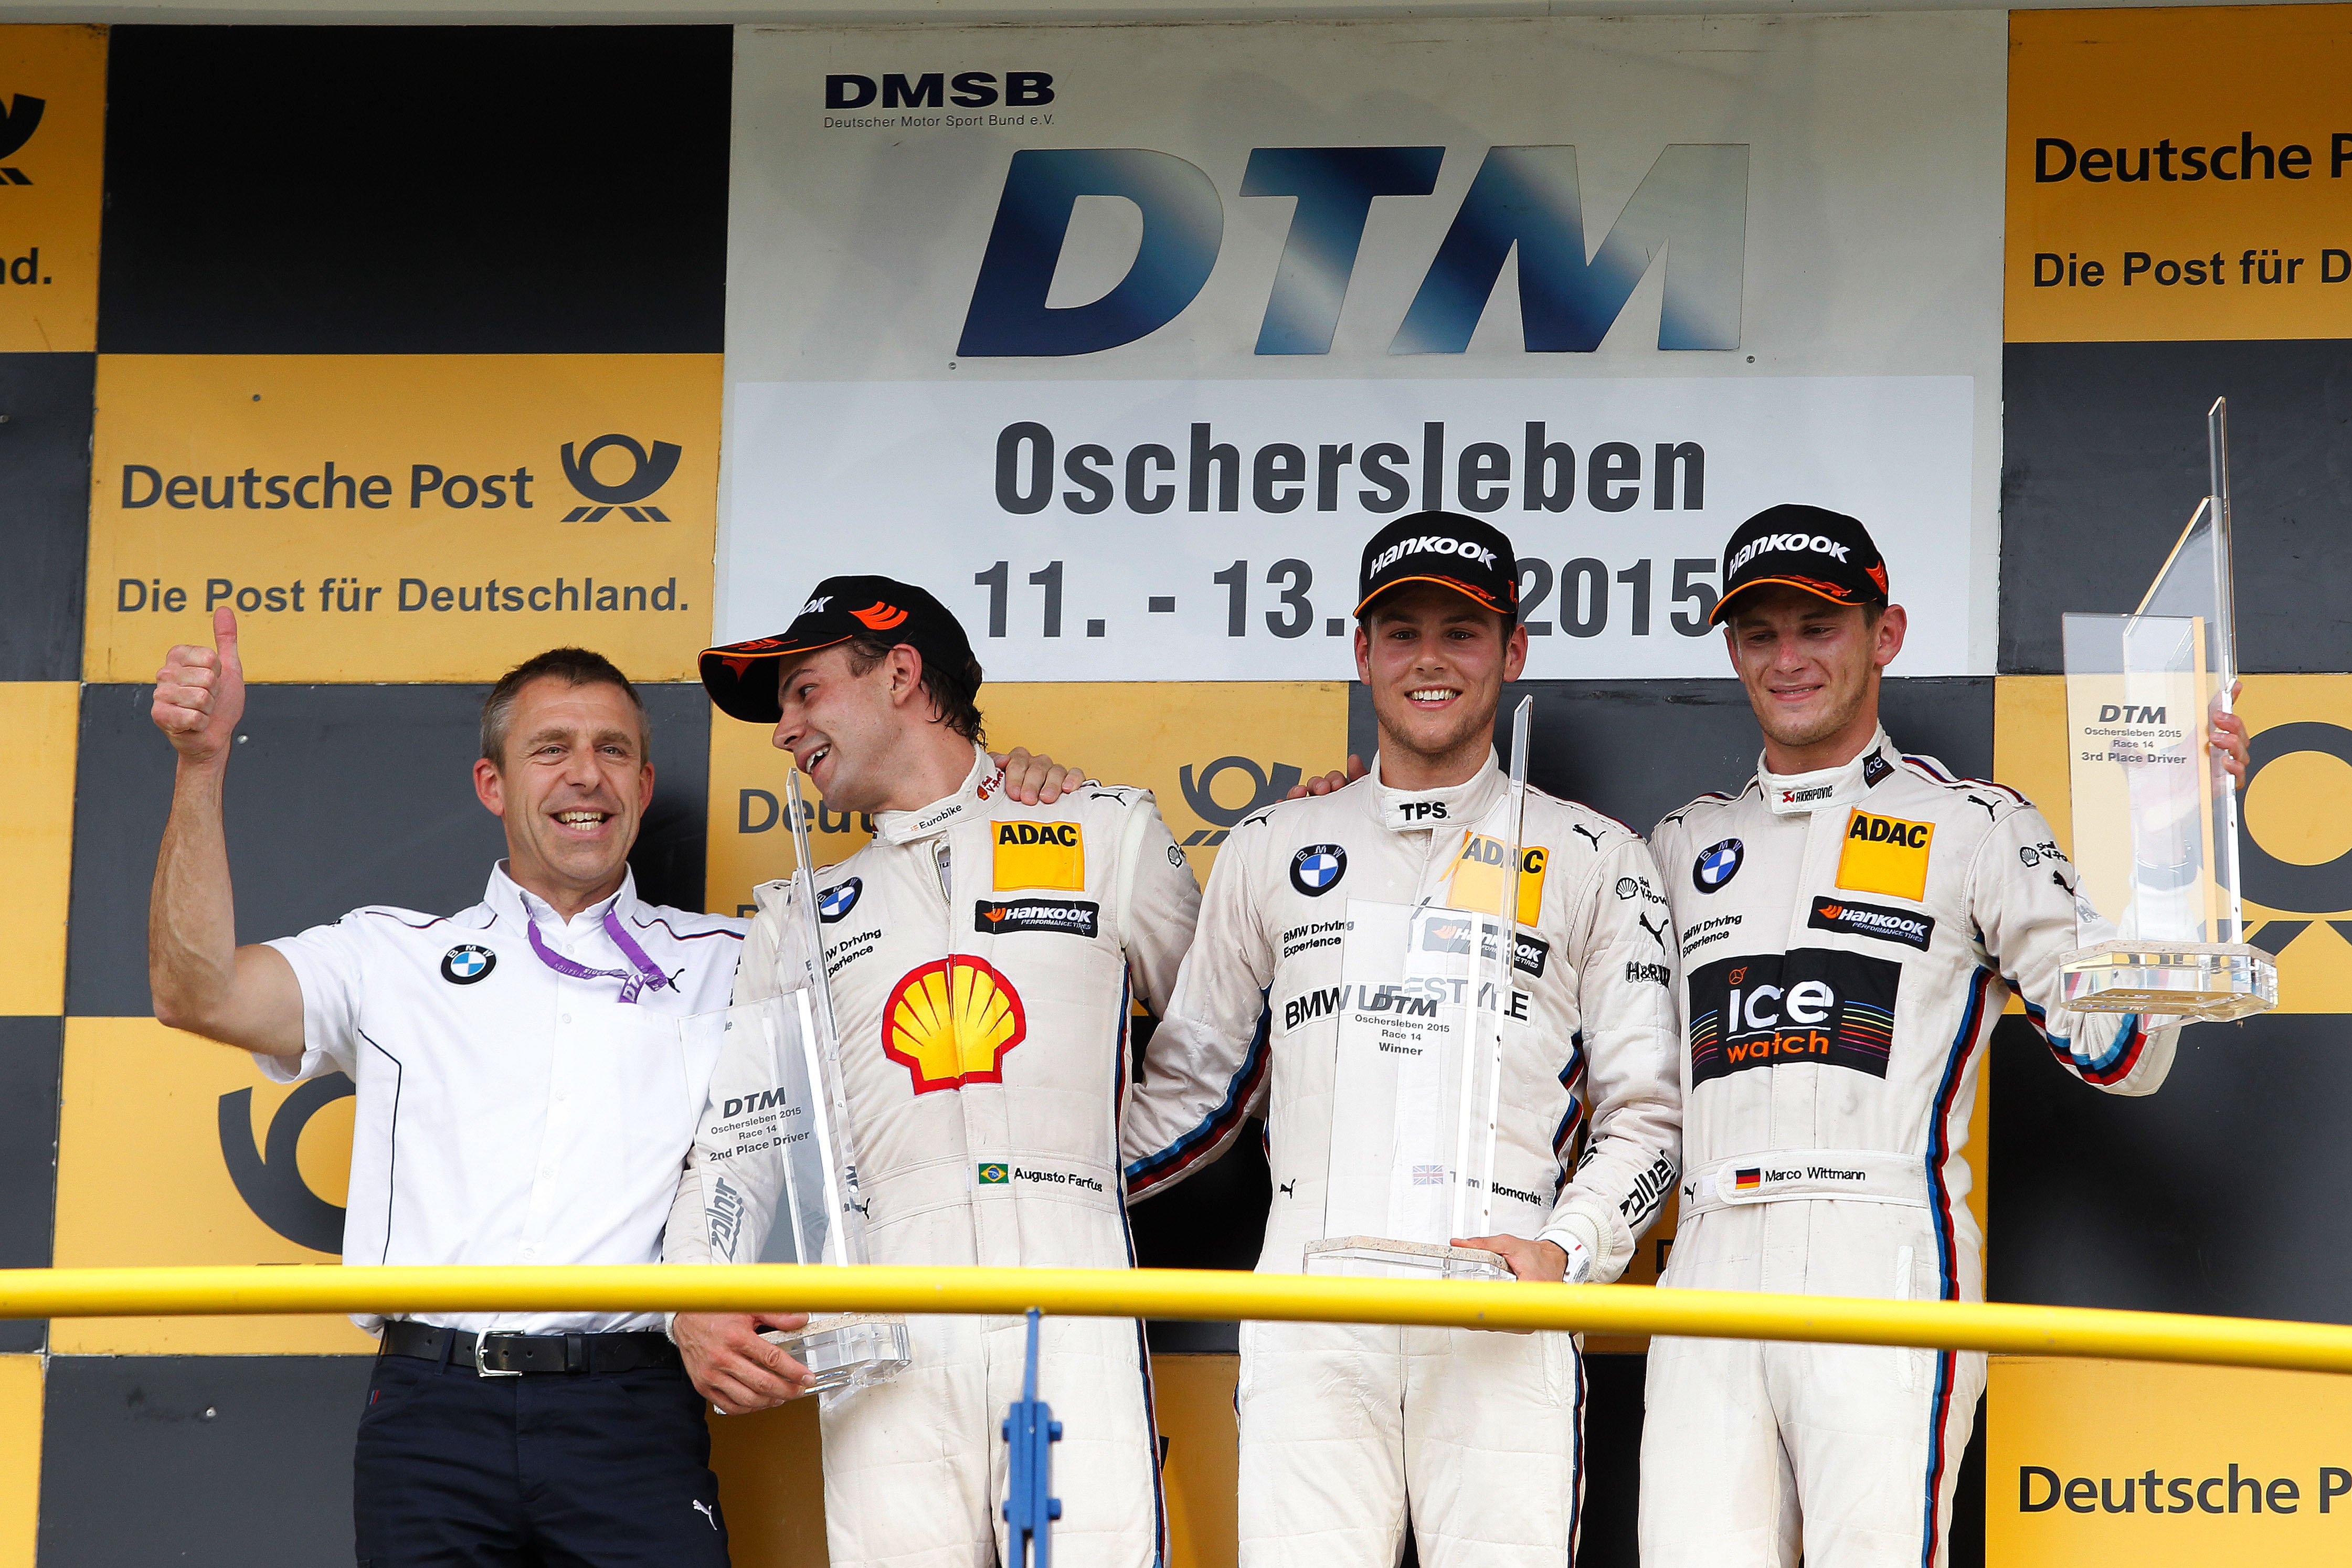 Oschersleben (DE) 13th September 2015. BMW Motorsport, Race 14, Bart Mampaey (BR) Team Principal BMW Team RBM, 2nd Place Driver Augusto Farfus, Winner Tom Blomqvist (GB) and 3rd Place Driver Marco Wittmann (DE). This image is copyright free for editorial use © BMW AG (09/2015).